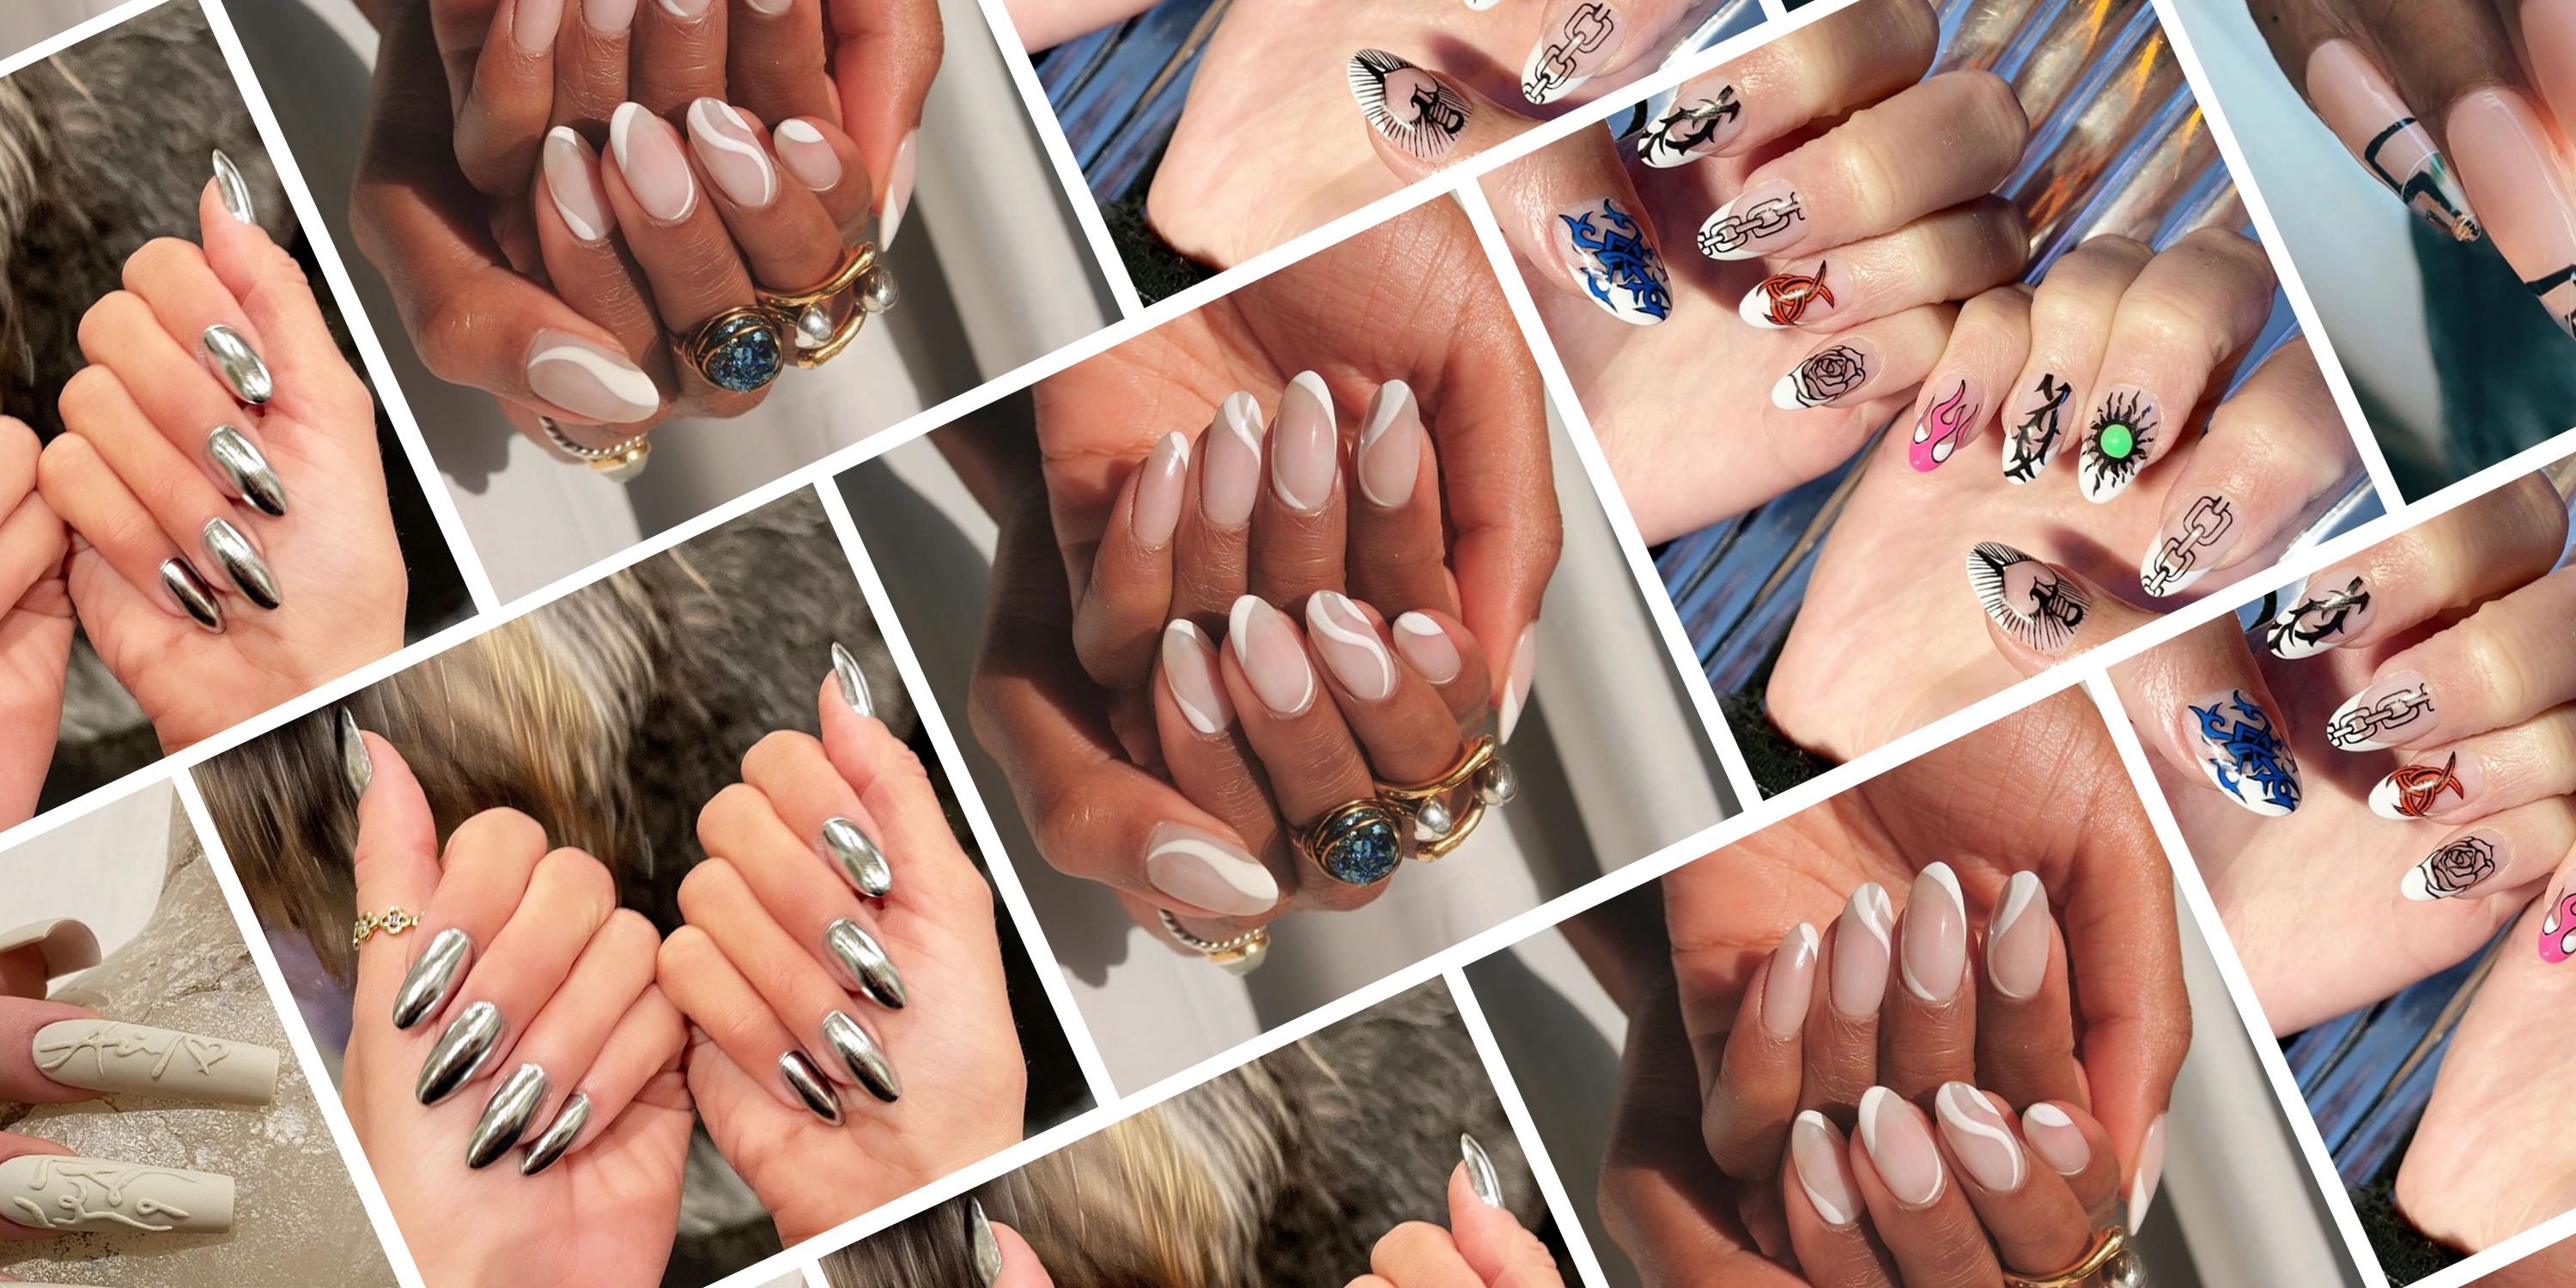 9. "The Top Nail Trends of 2021" by Refinery29 - wide 9